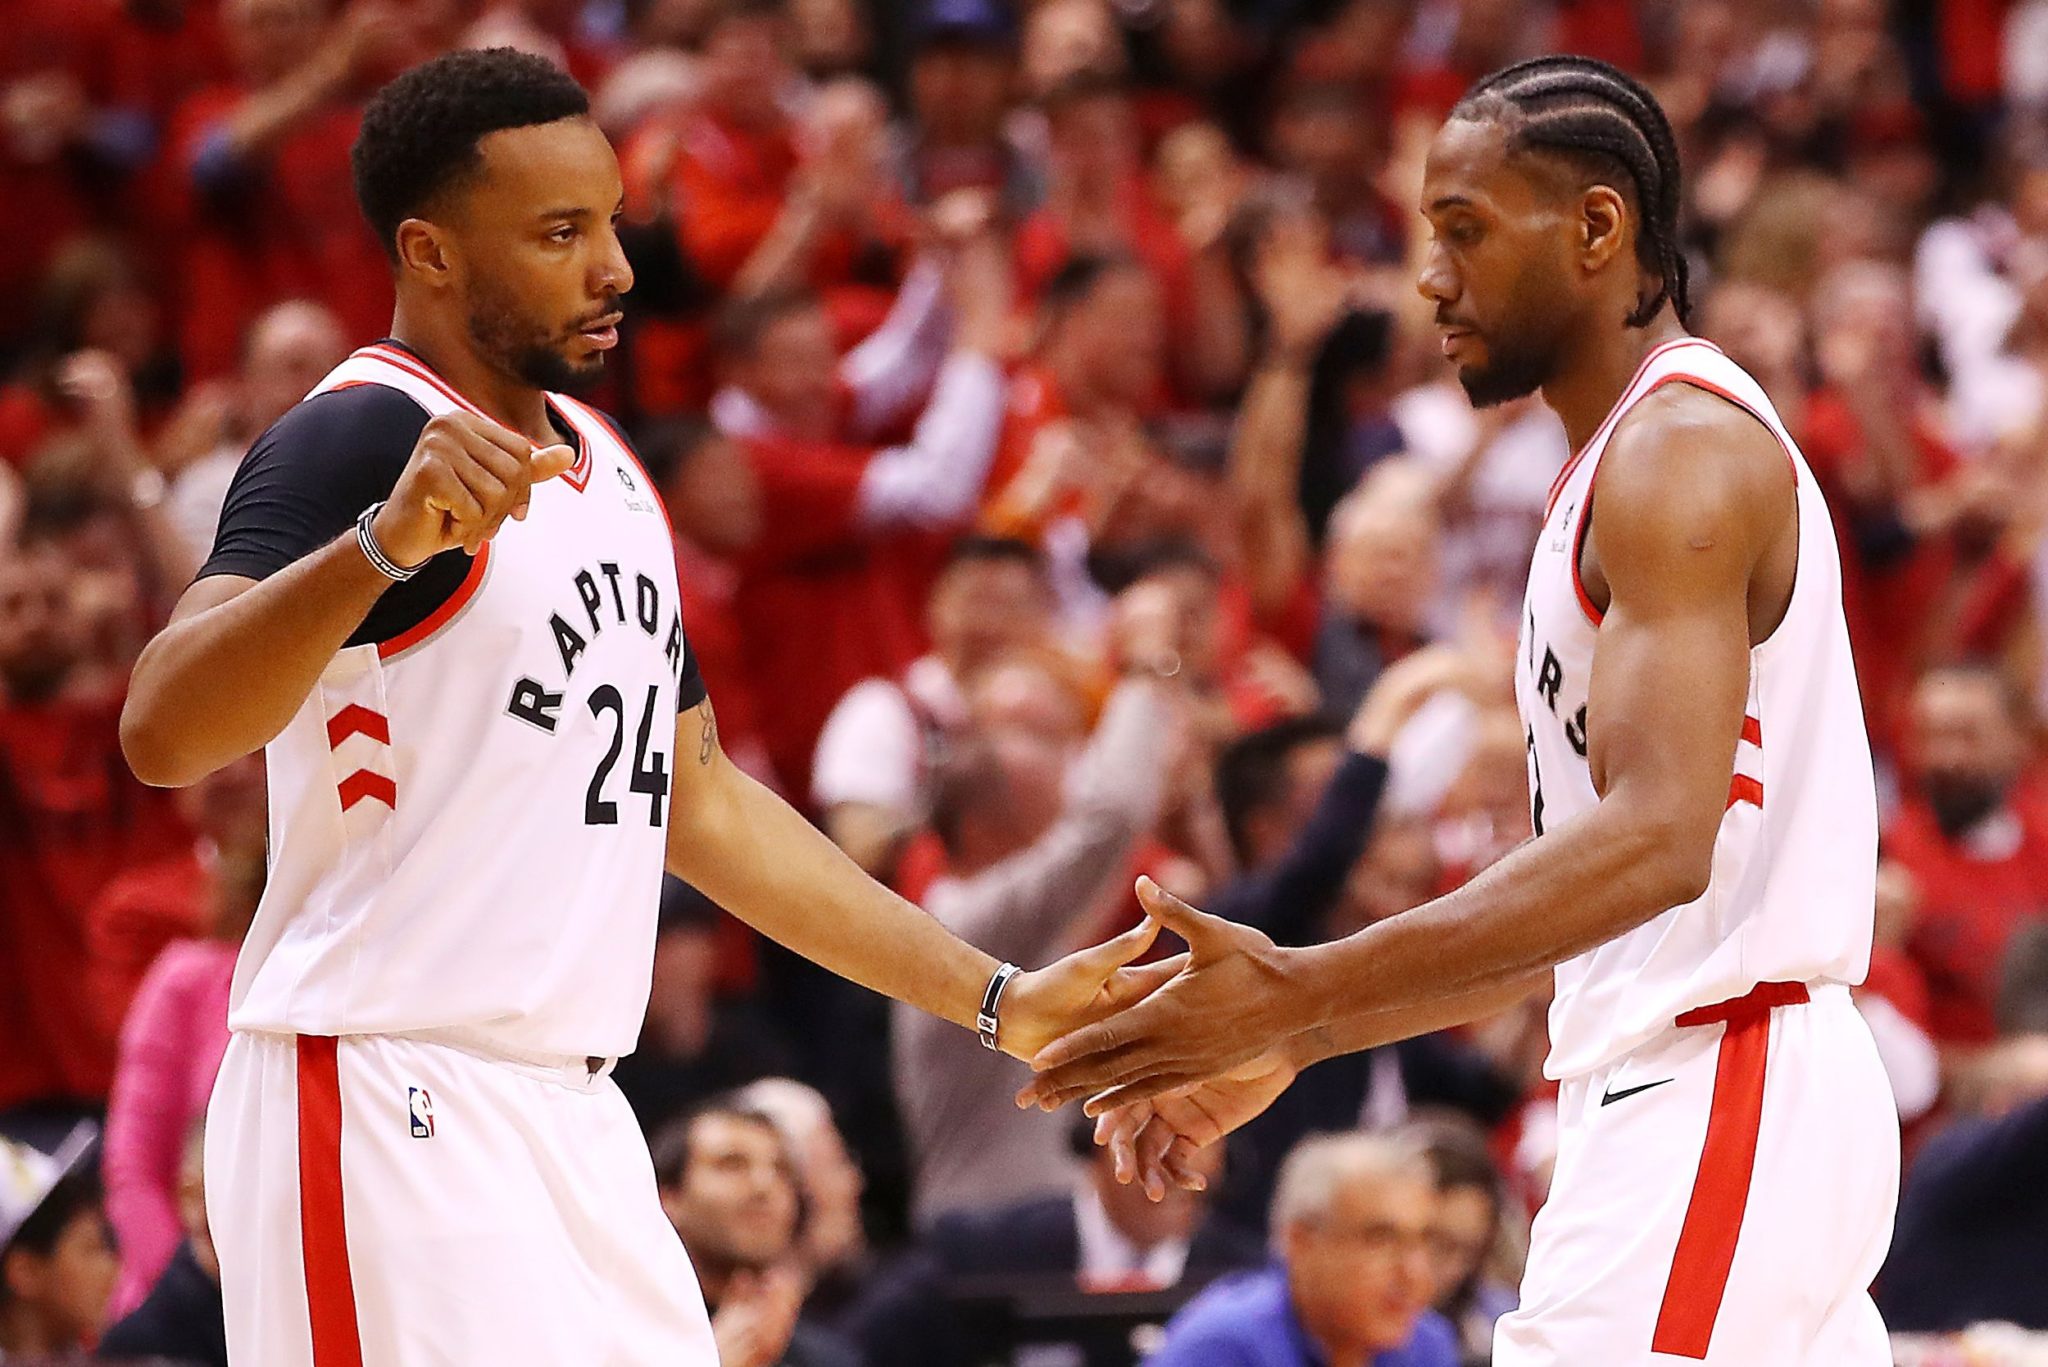 Kawhi Leonard Signed 3-Year Deal Worth $103M With Clippers